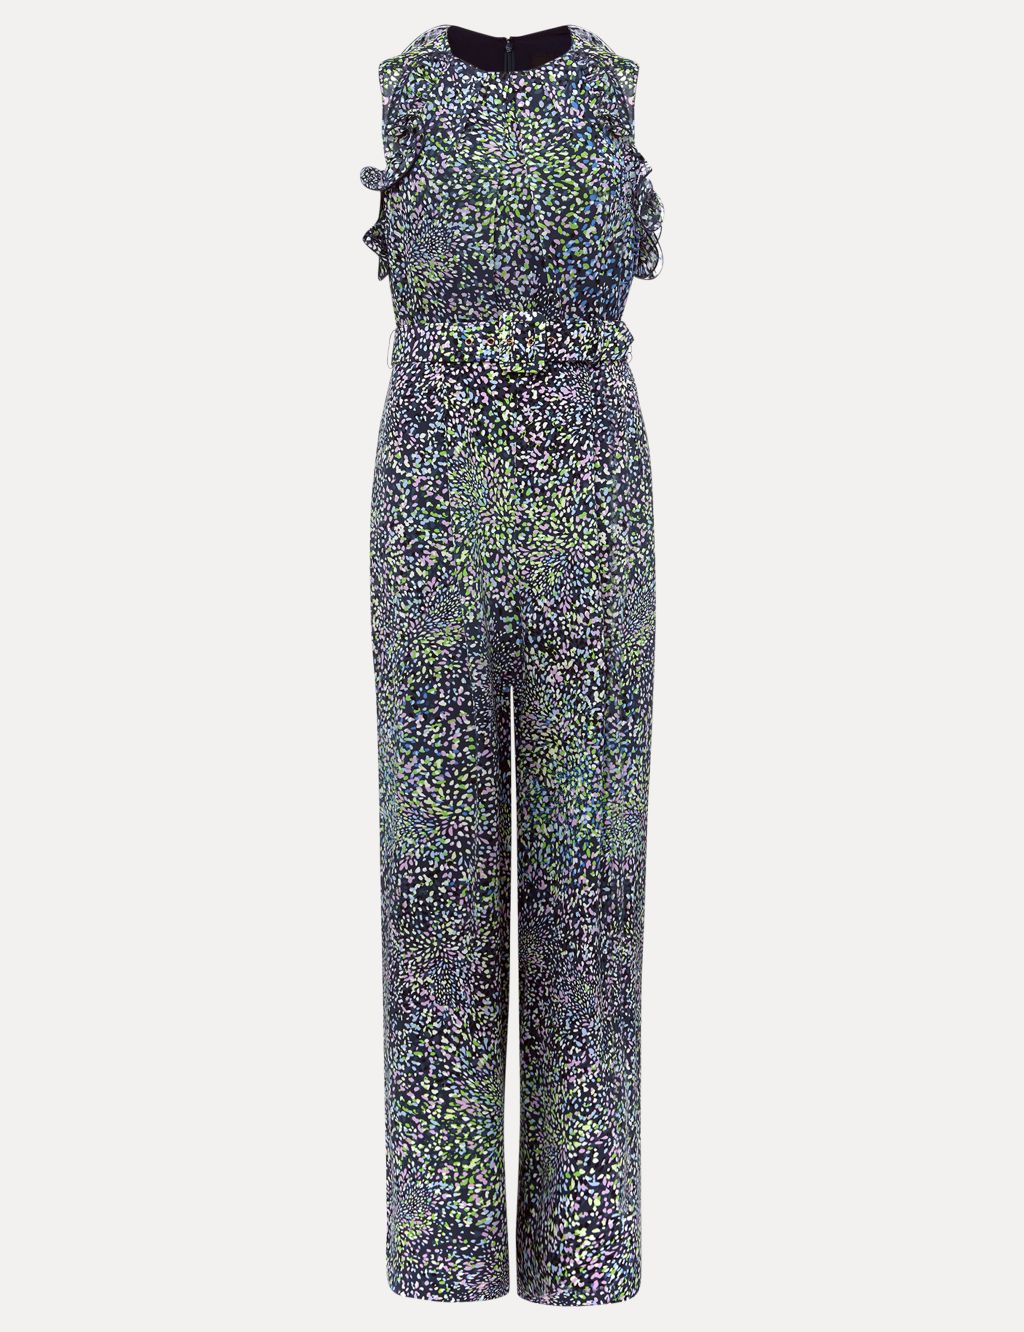 Printed Belted Sleeveless Wide Leg Jumpsuit image 2